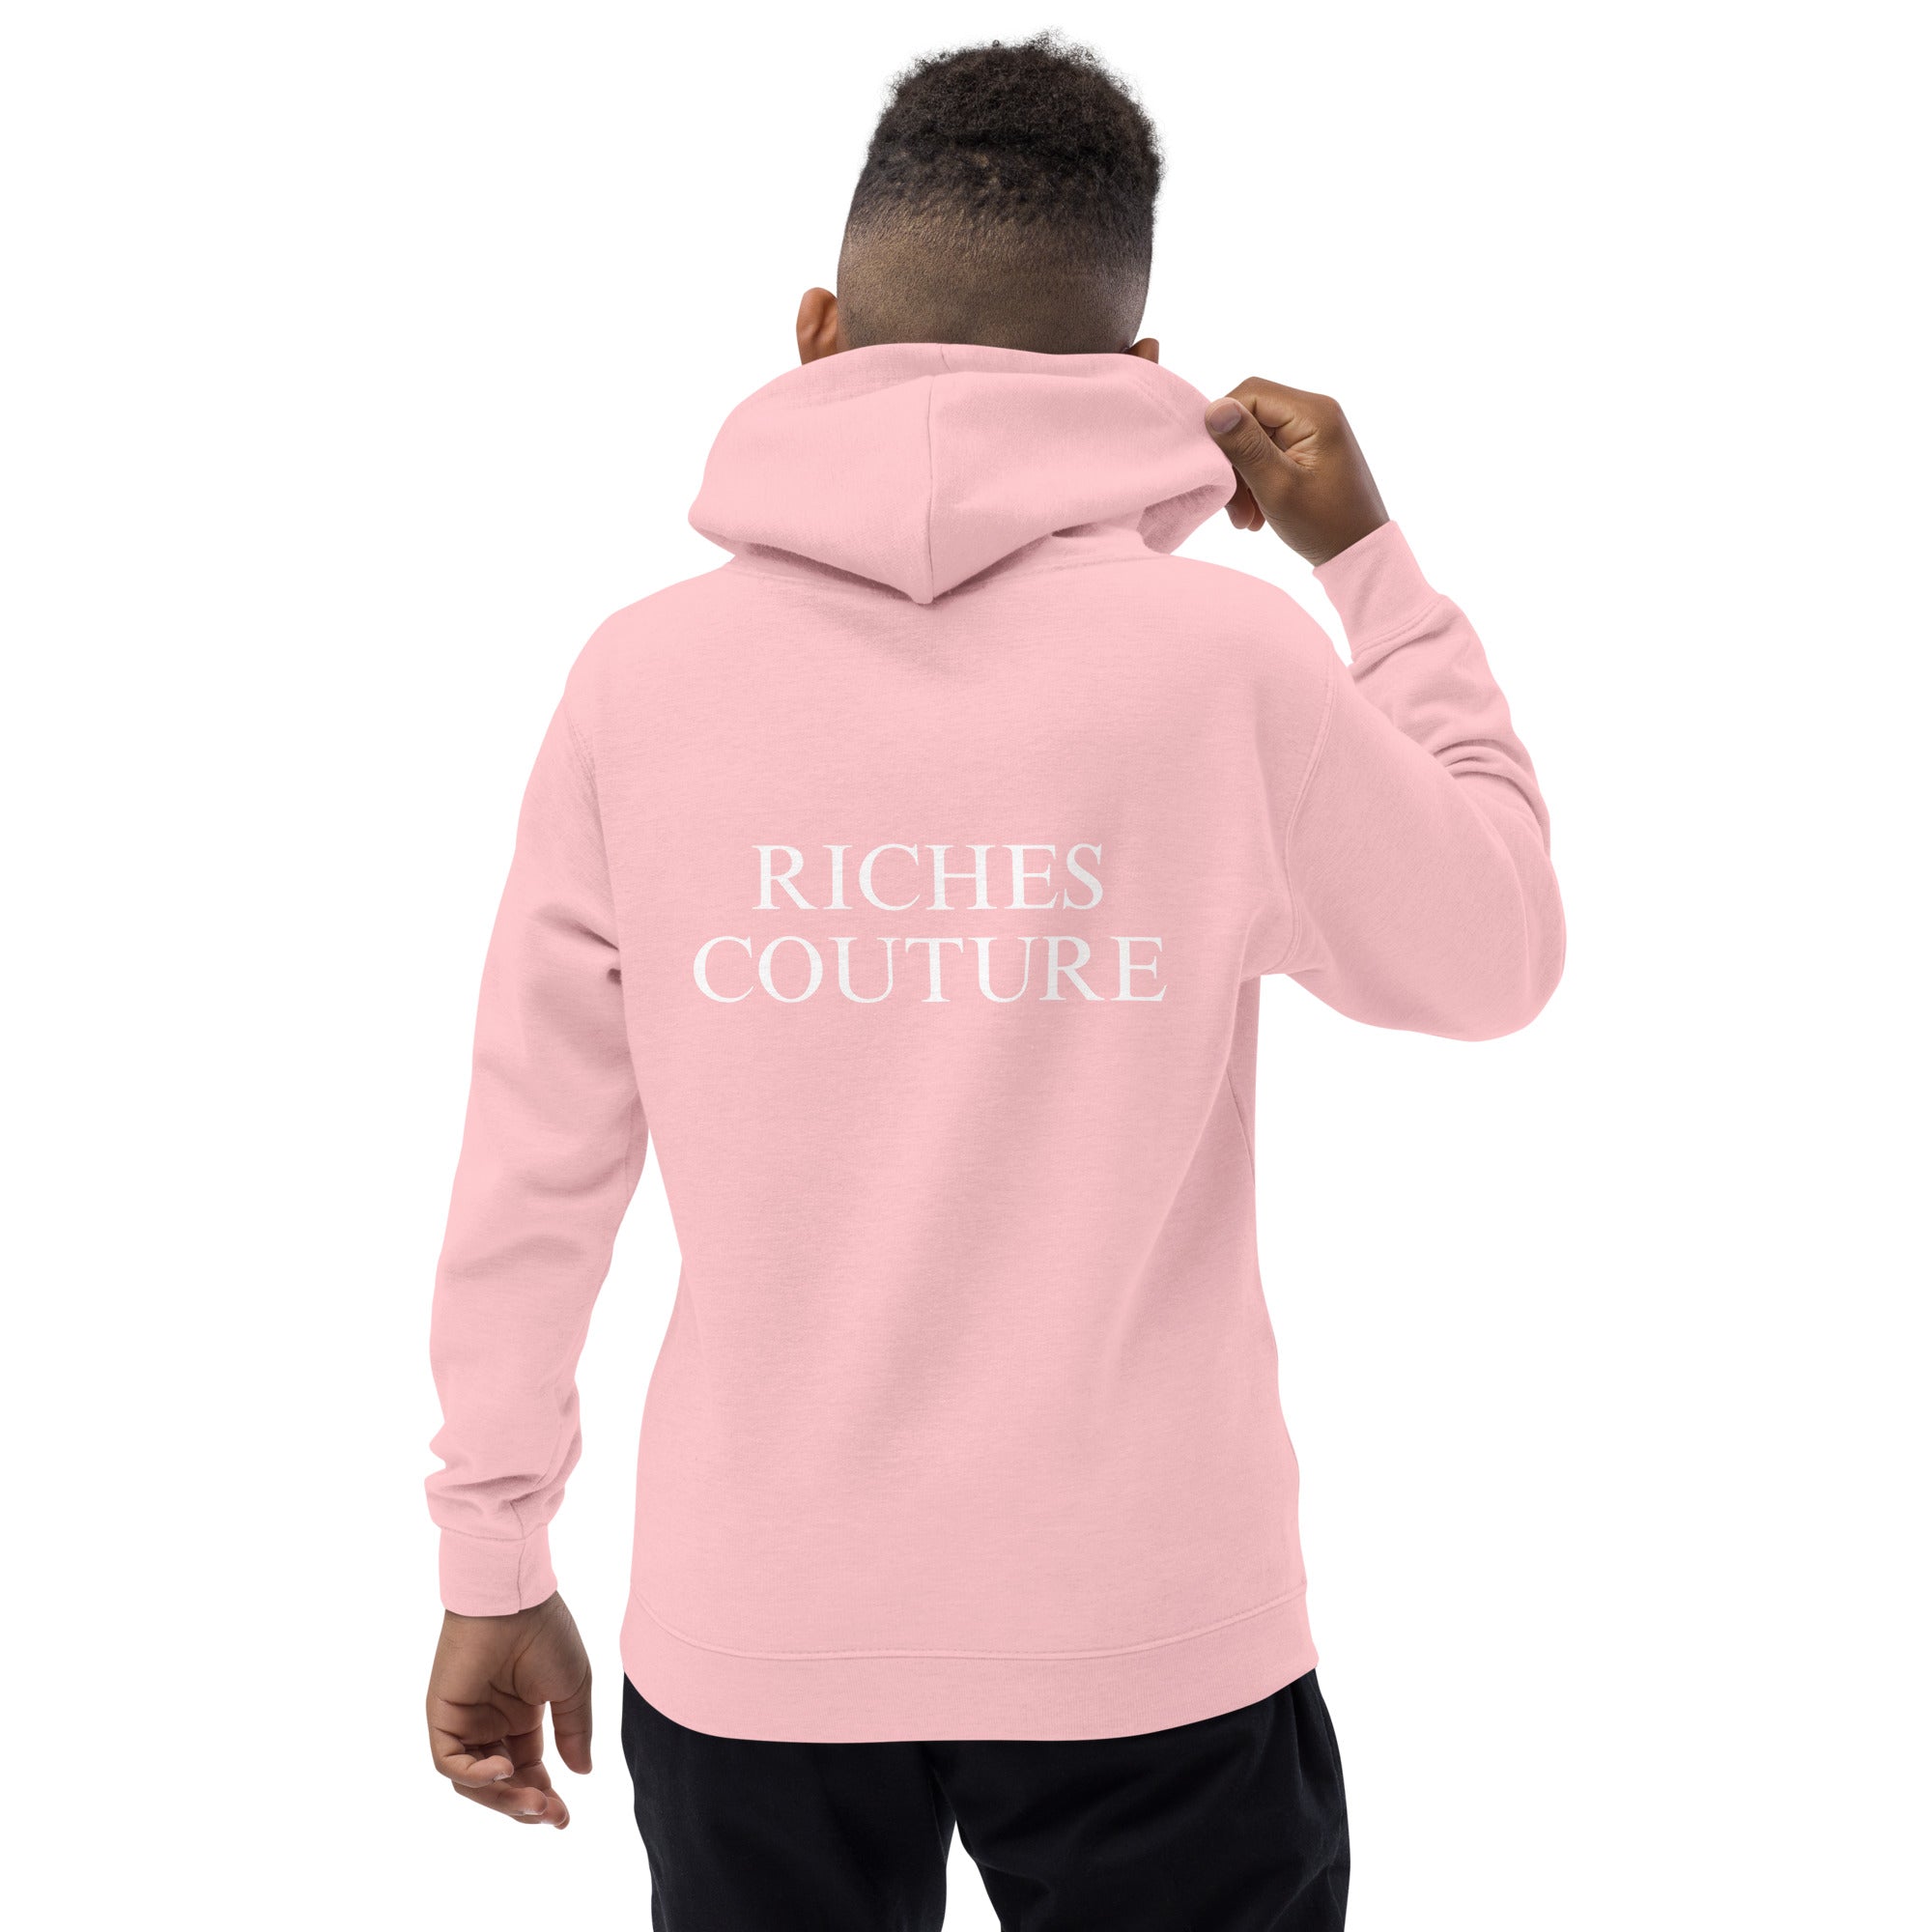 Riches Couture Boys Comfort kids’ hoodie in light pink.